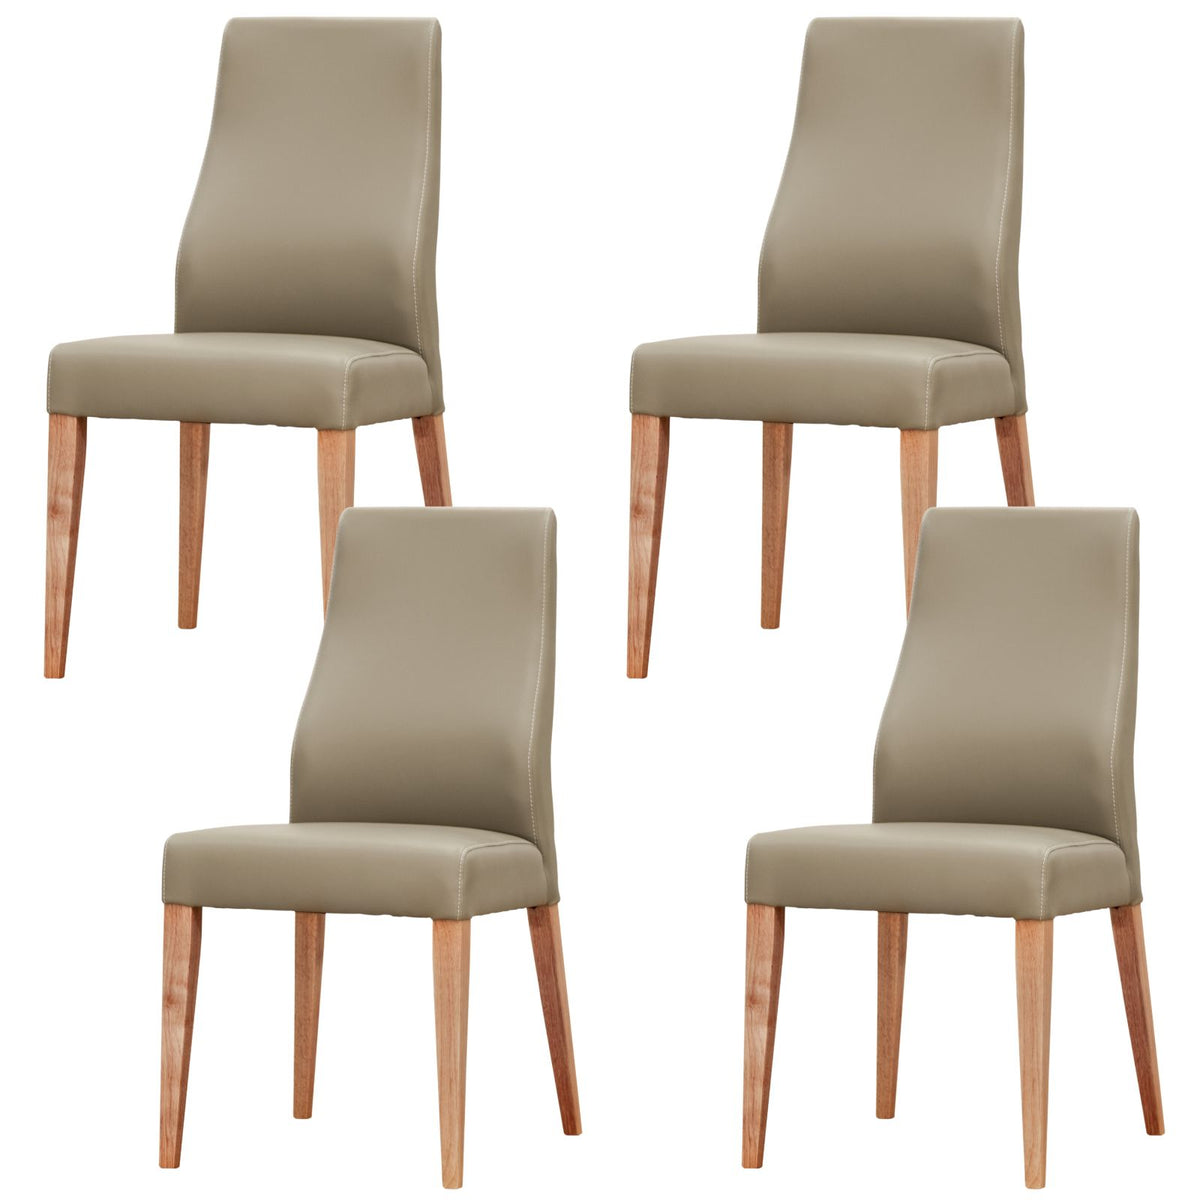 Rosemallow Dining Chair Set of 4 PU Leather Seat Solid Messmate Timber - Silver